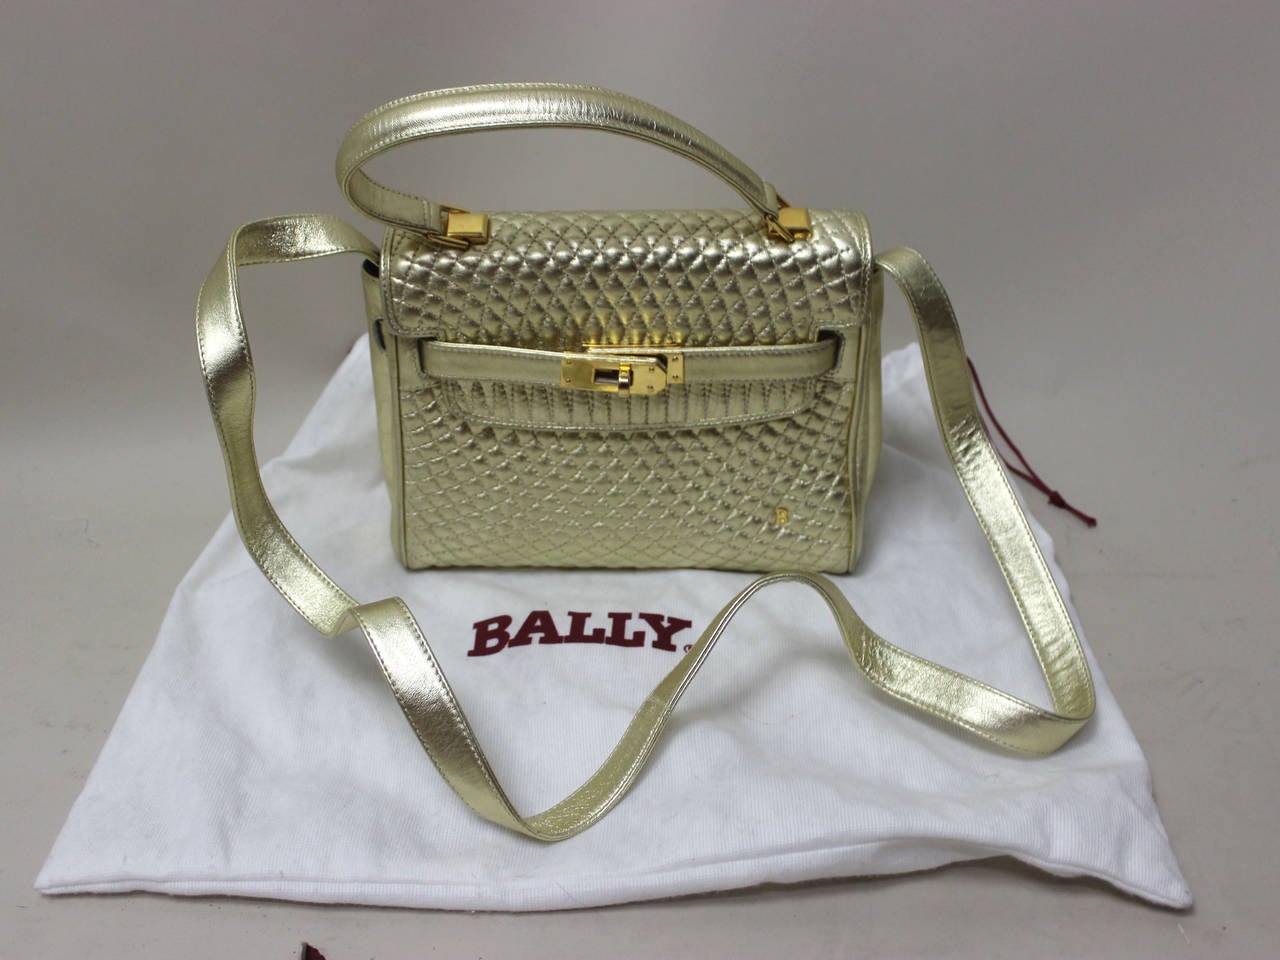 This vintage Bally bag was inspired by the Hermes Kelly Bag and is just as chic! The gold quilted leather is a standout piece. There is a gold 